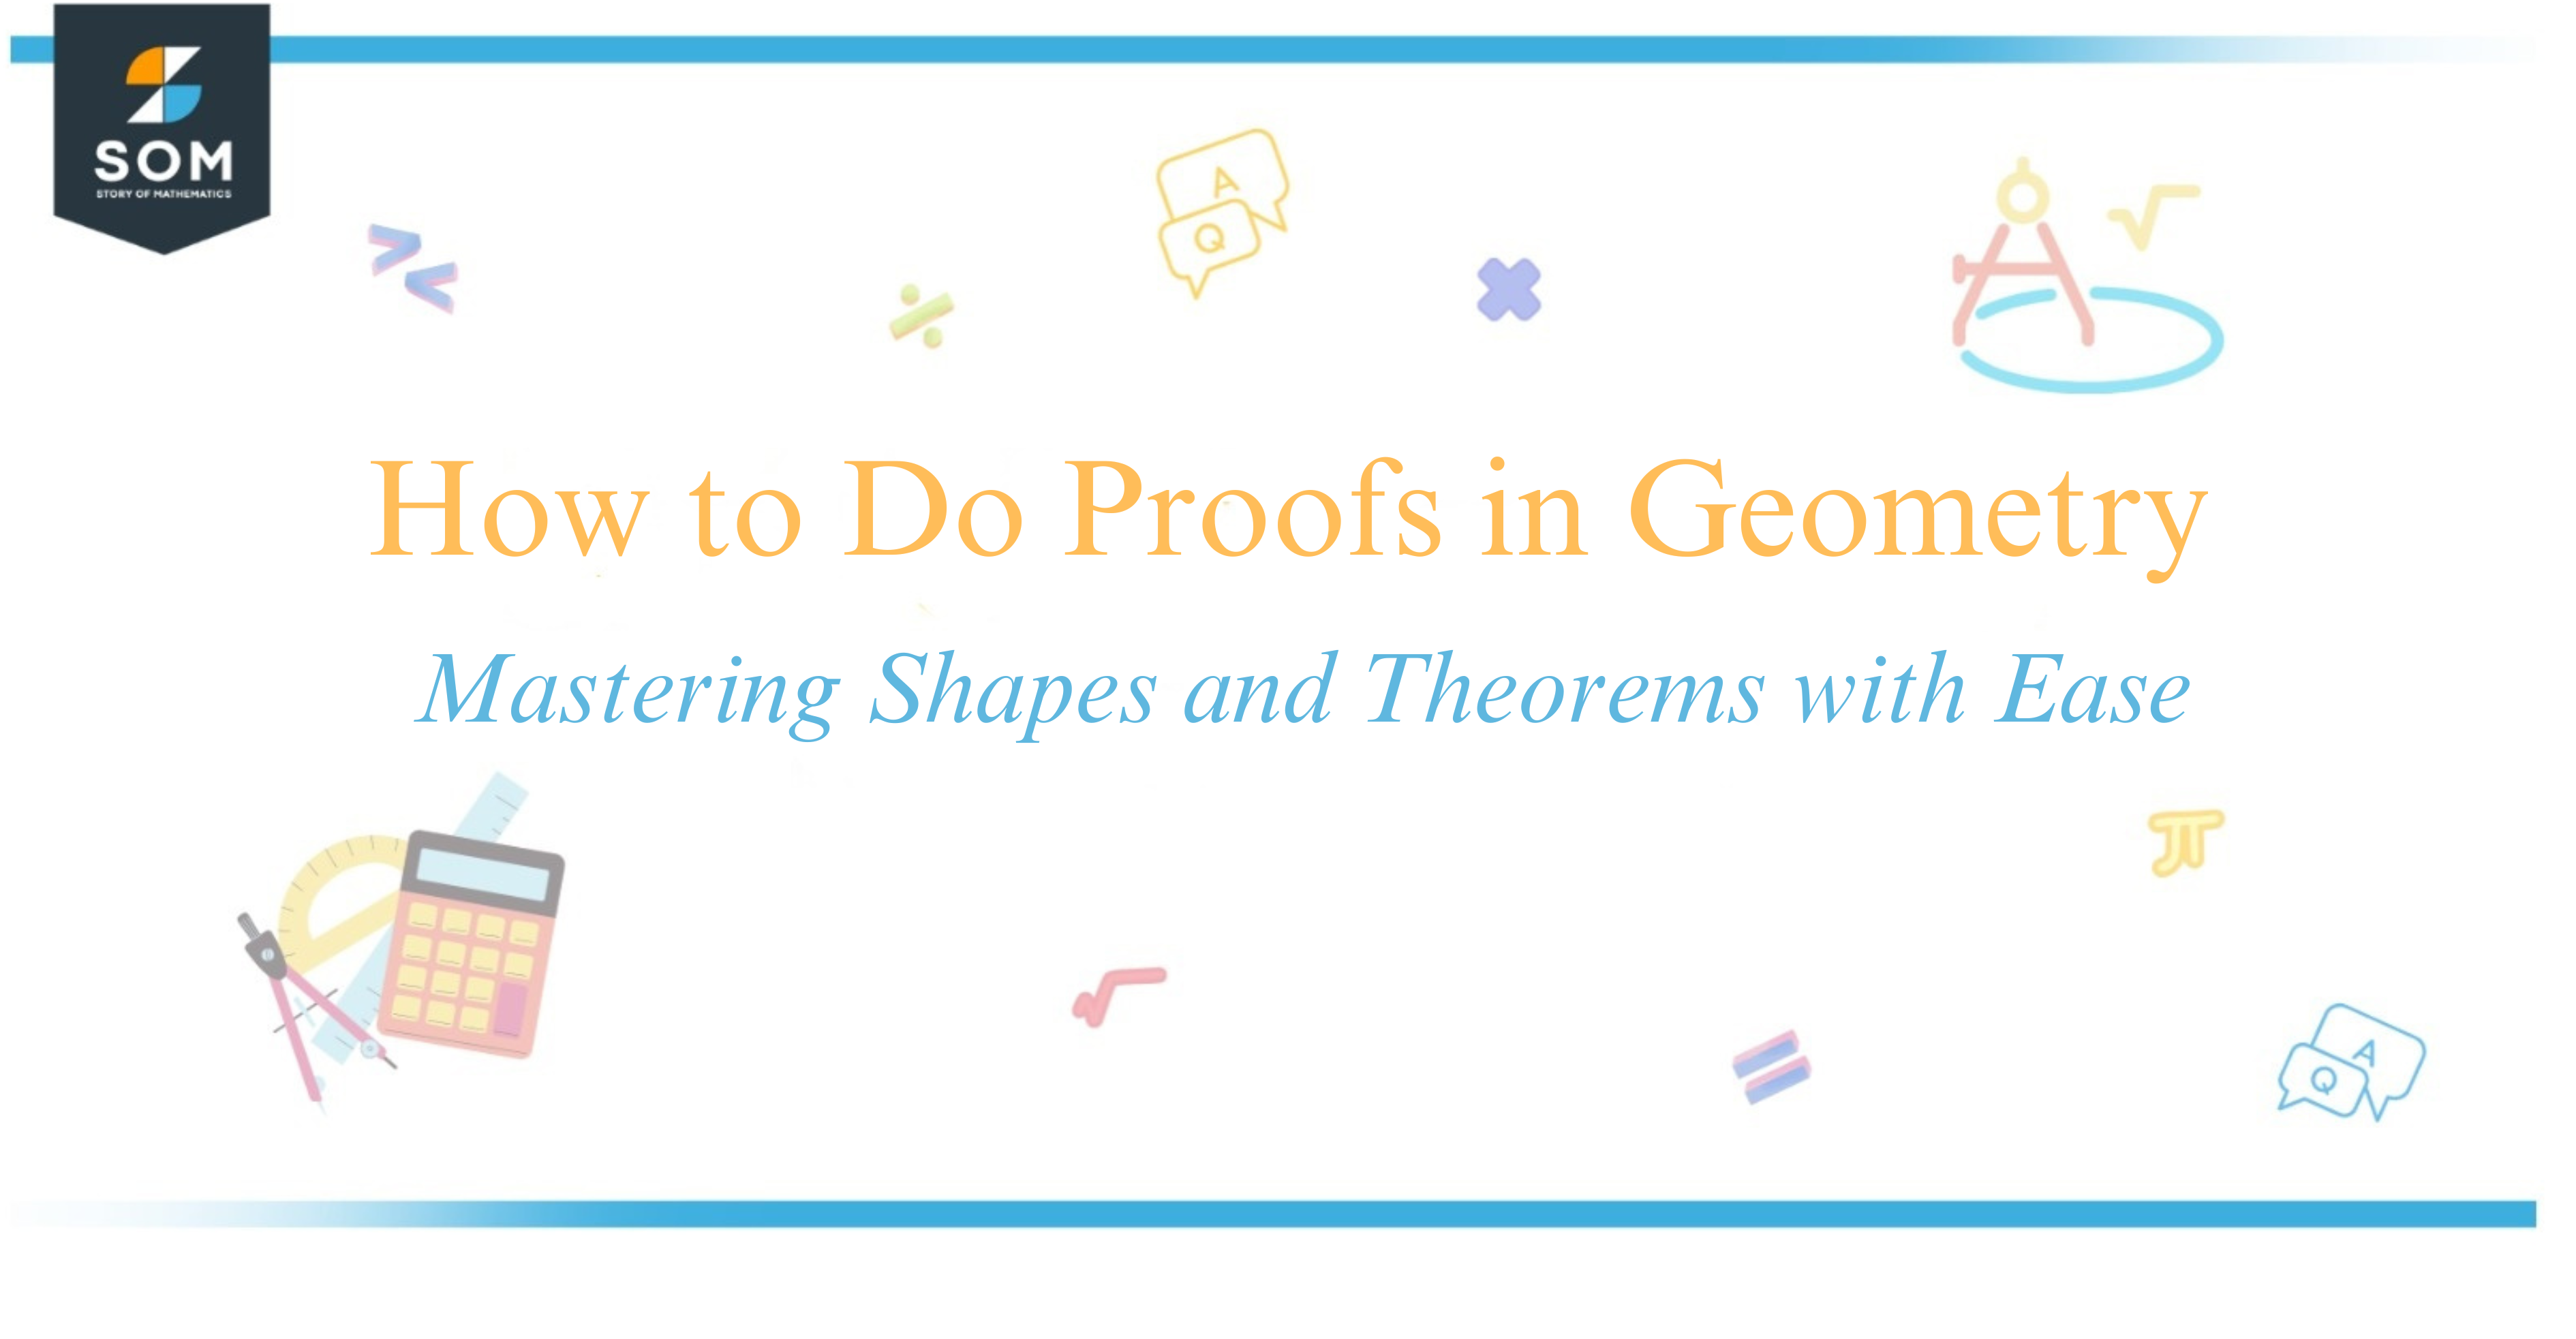 How to Do Proofs in Geometry Mastering Shapes and Theorems with Ease